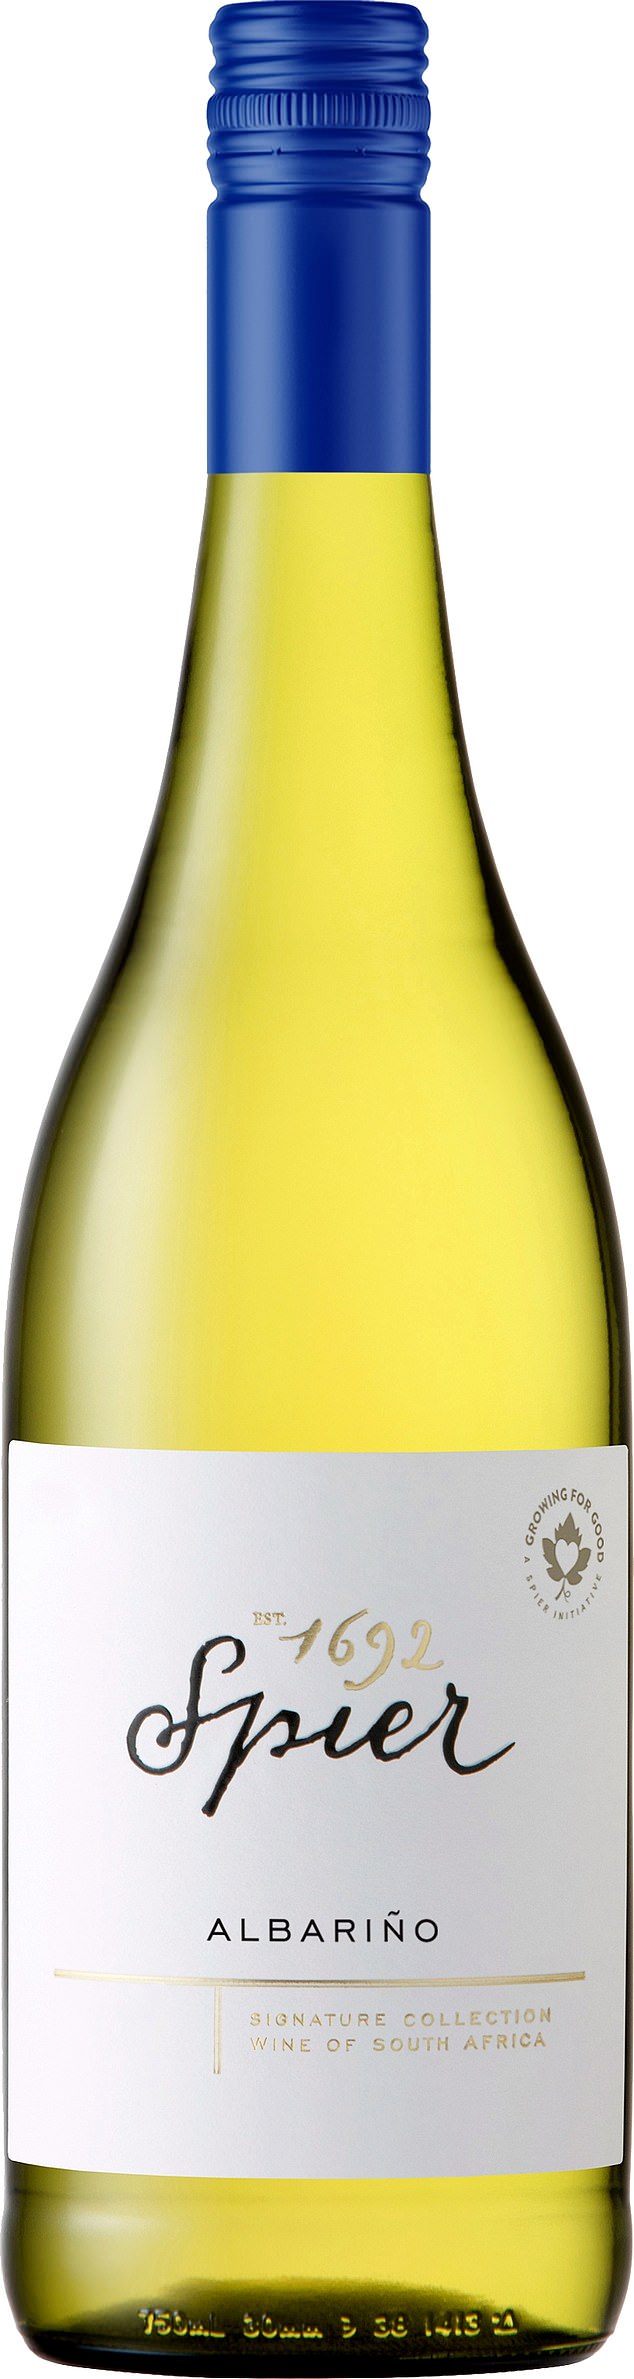 Here's a tropical and warm expression of Albariño from this leading South African wine region that maintains its characteristic bright acidity